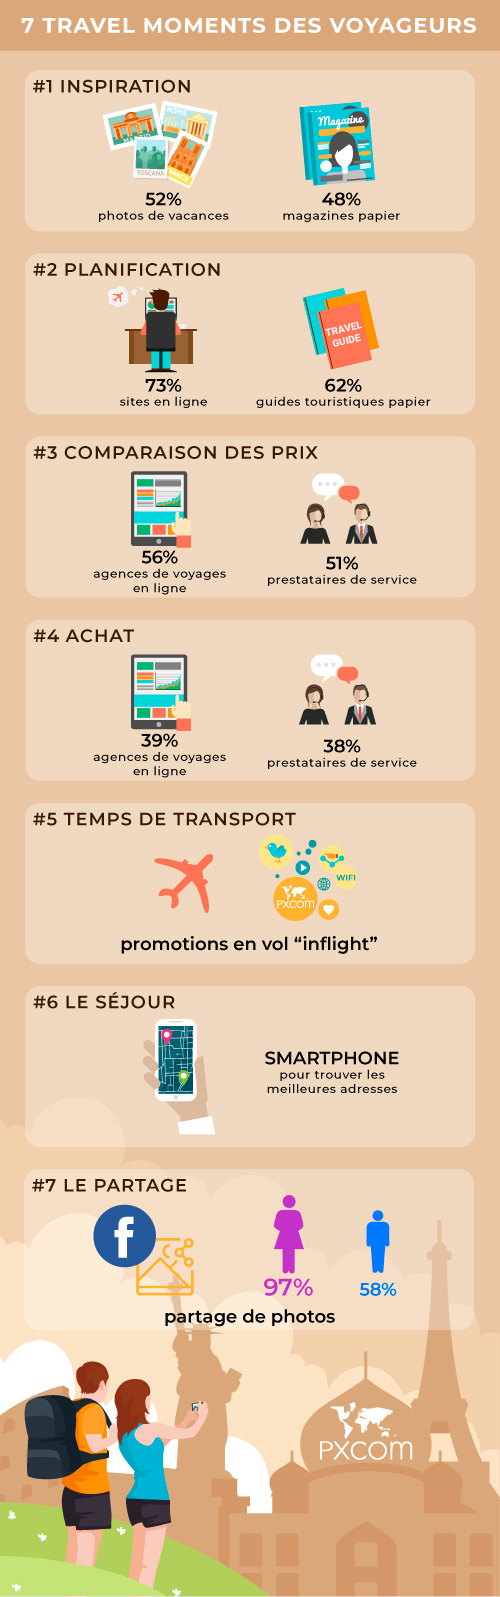 infographie moments voyageur 